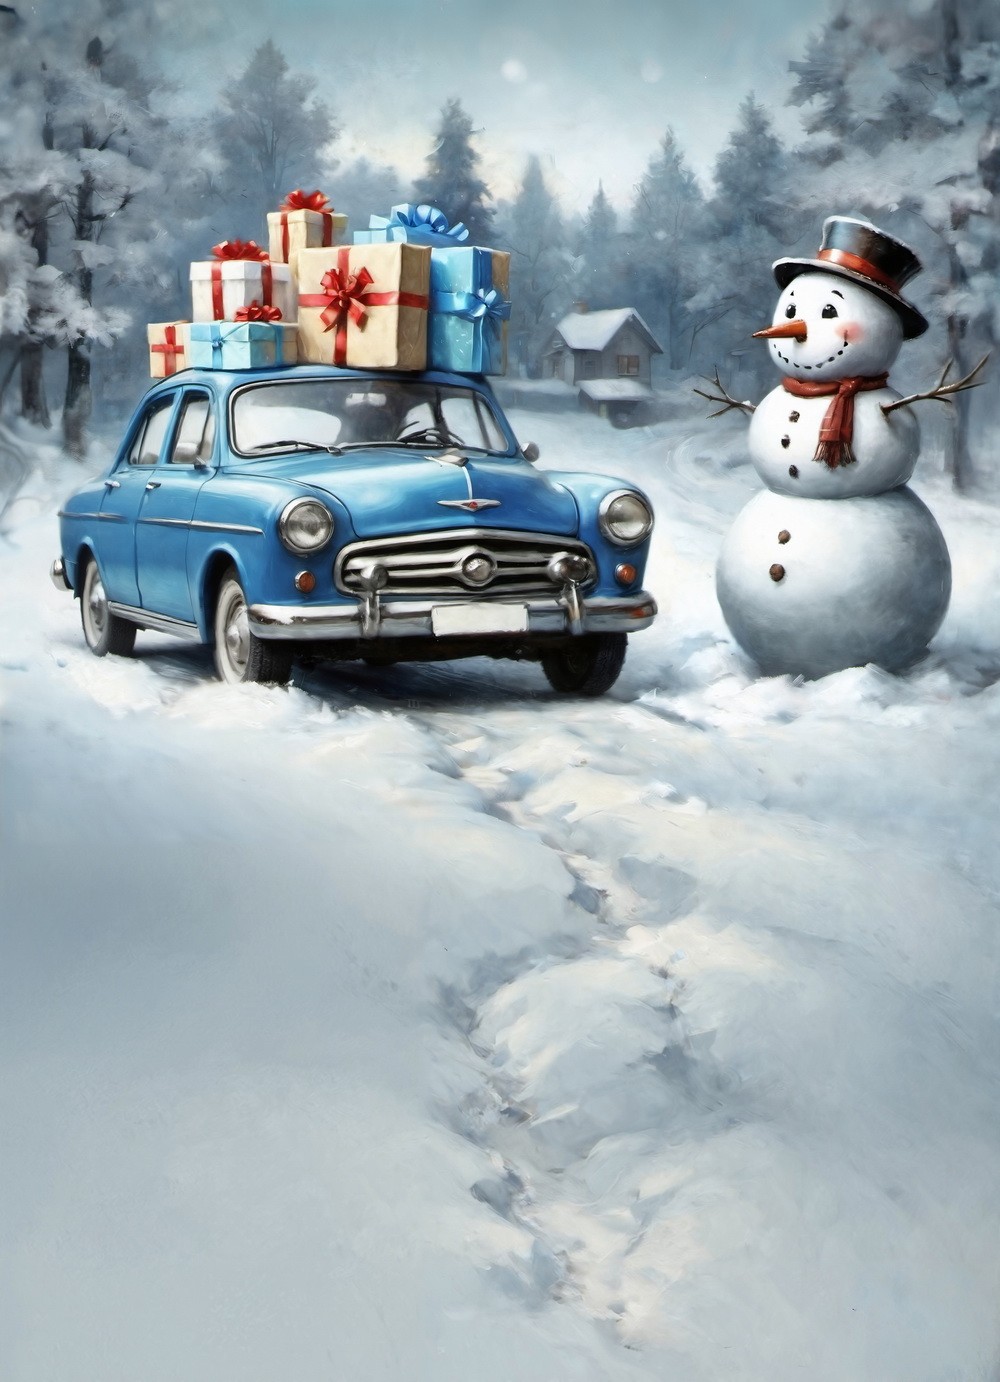 Combined backdrop "A car and a snowman"